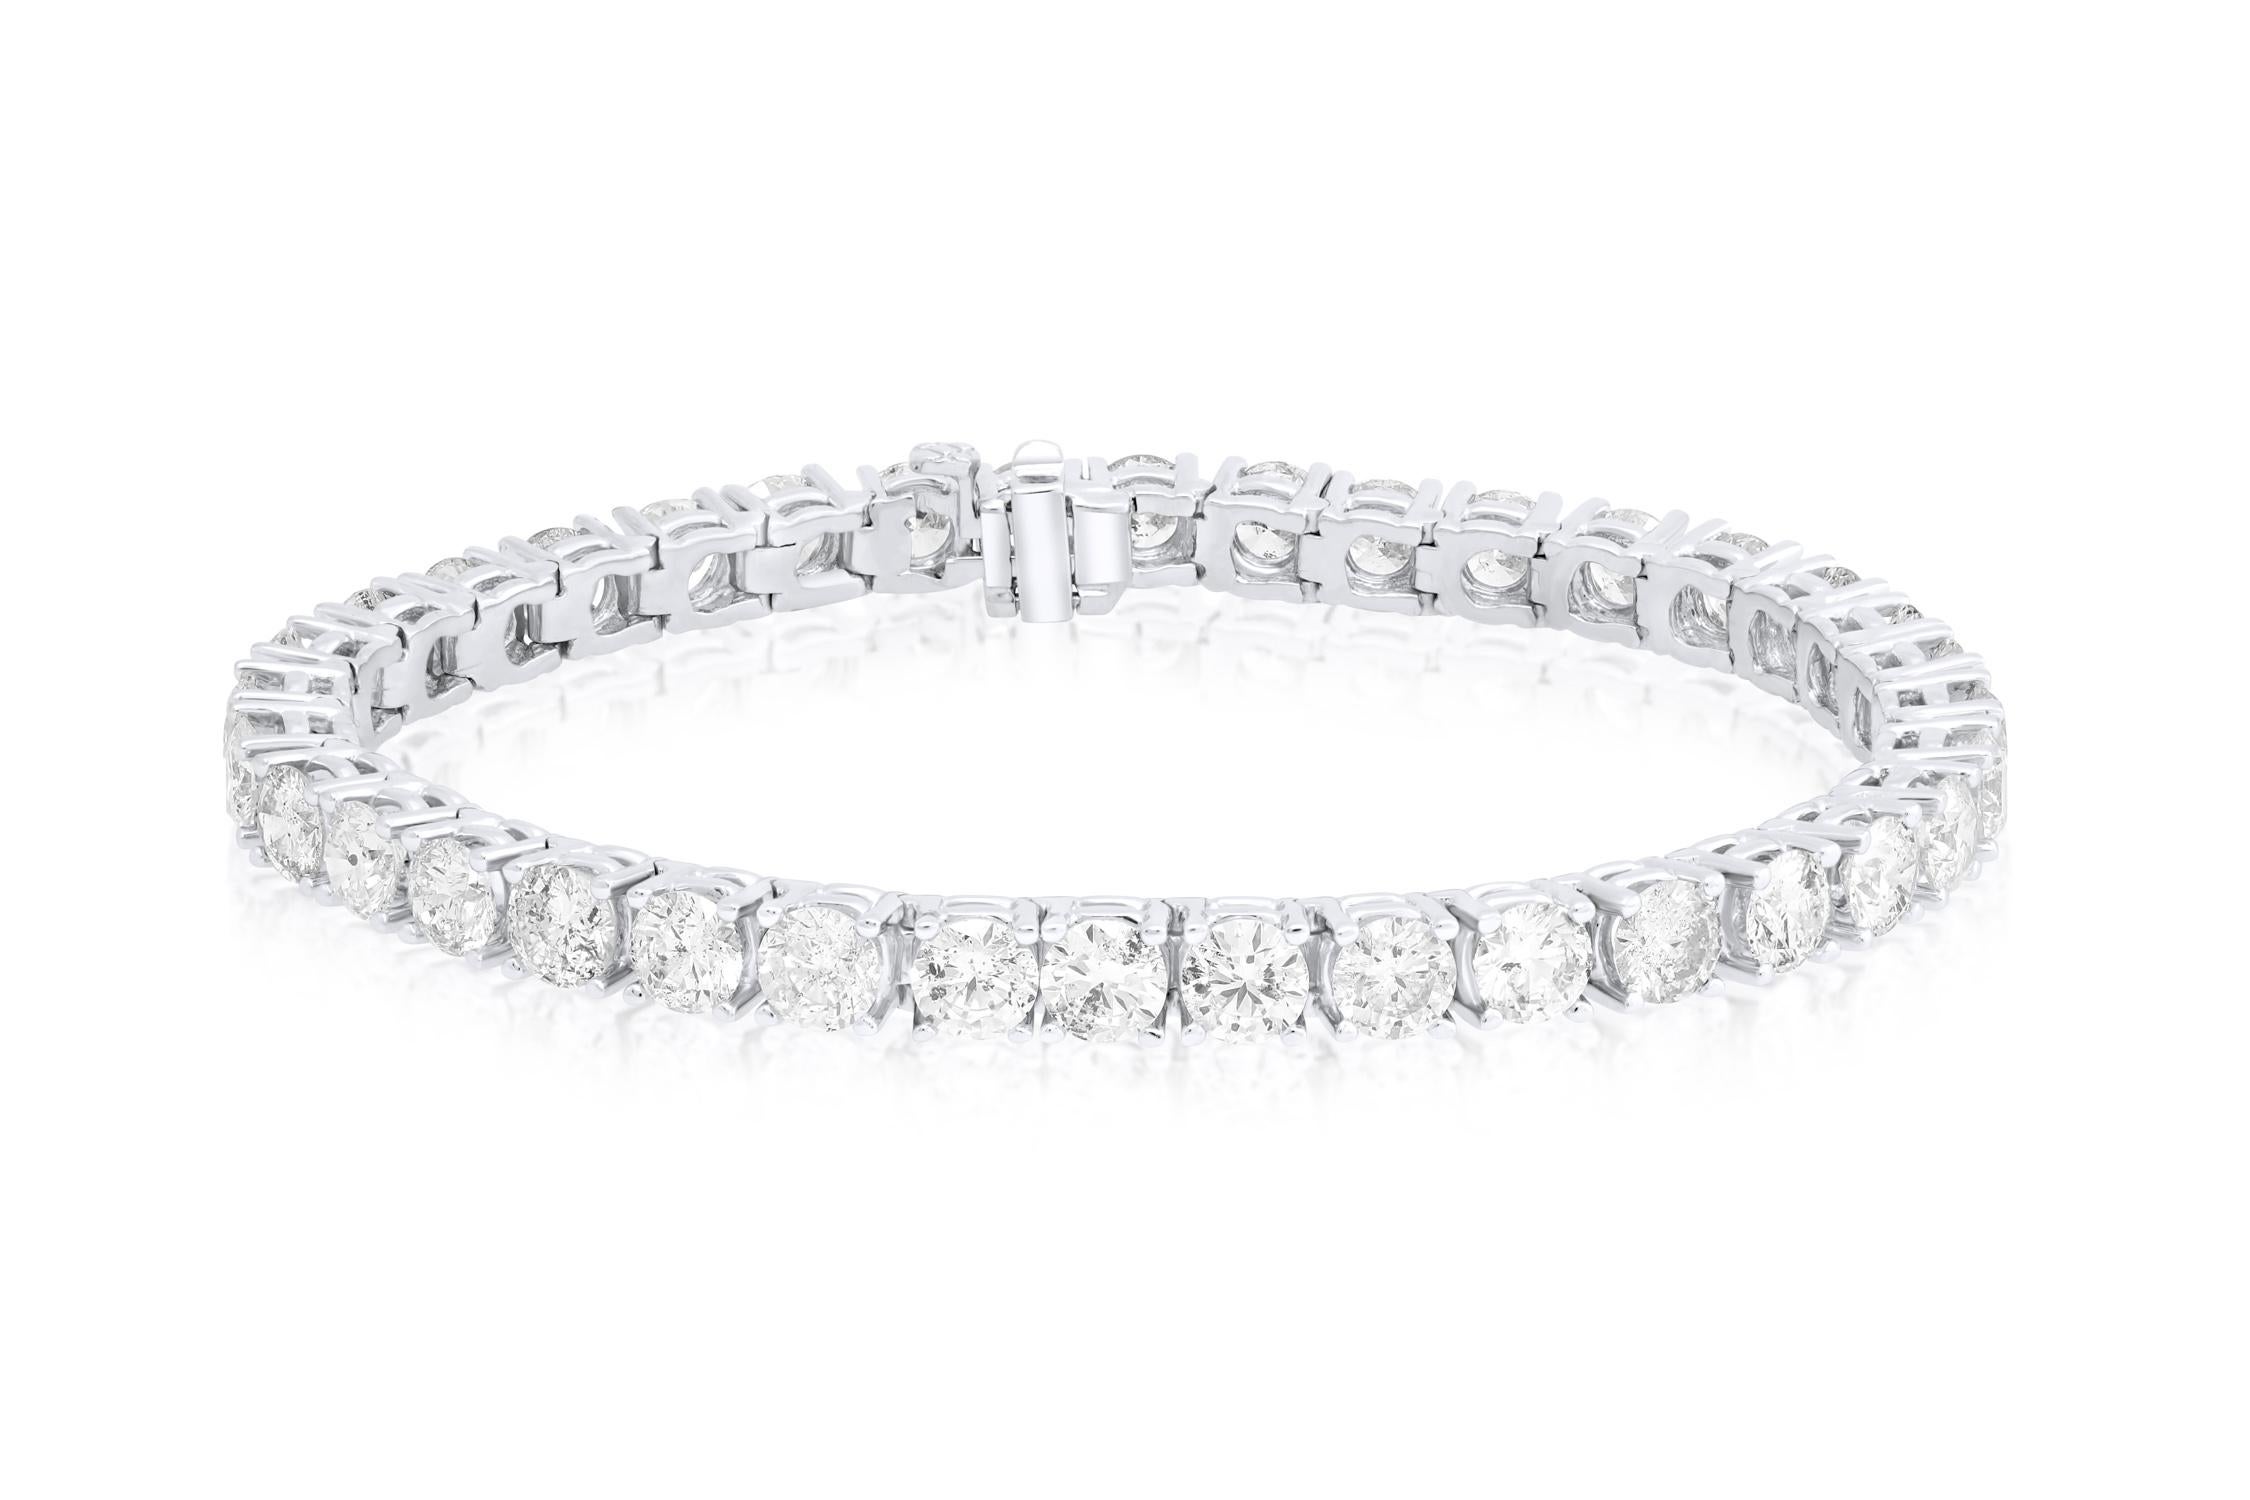 18 kt custom white gold 4 prong diamond tennis bracelet adorned with 8.75 cts round diamonds 42 stones 0.20 each stone FG color SI clarity.  Excellent Cut.